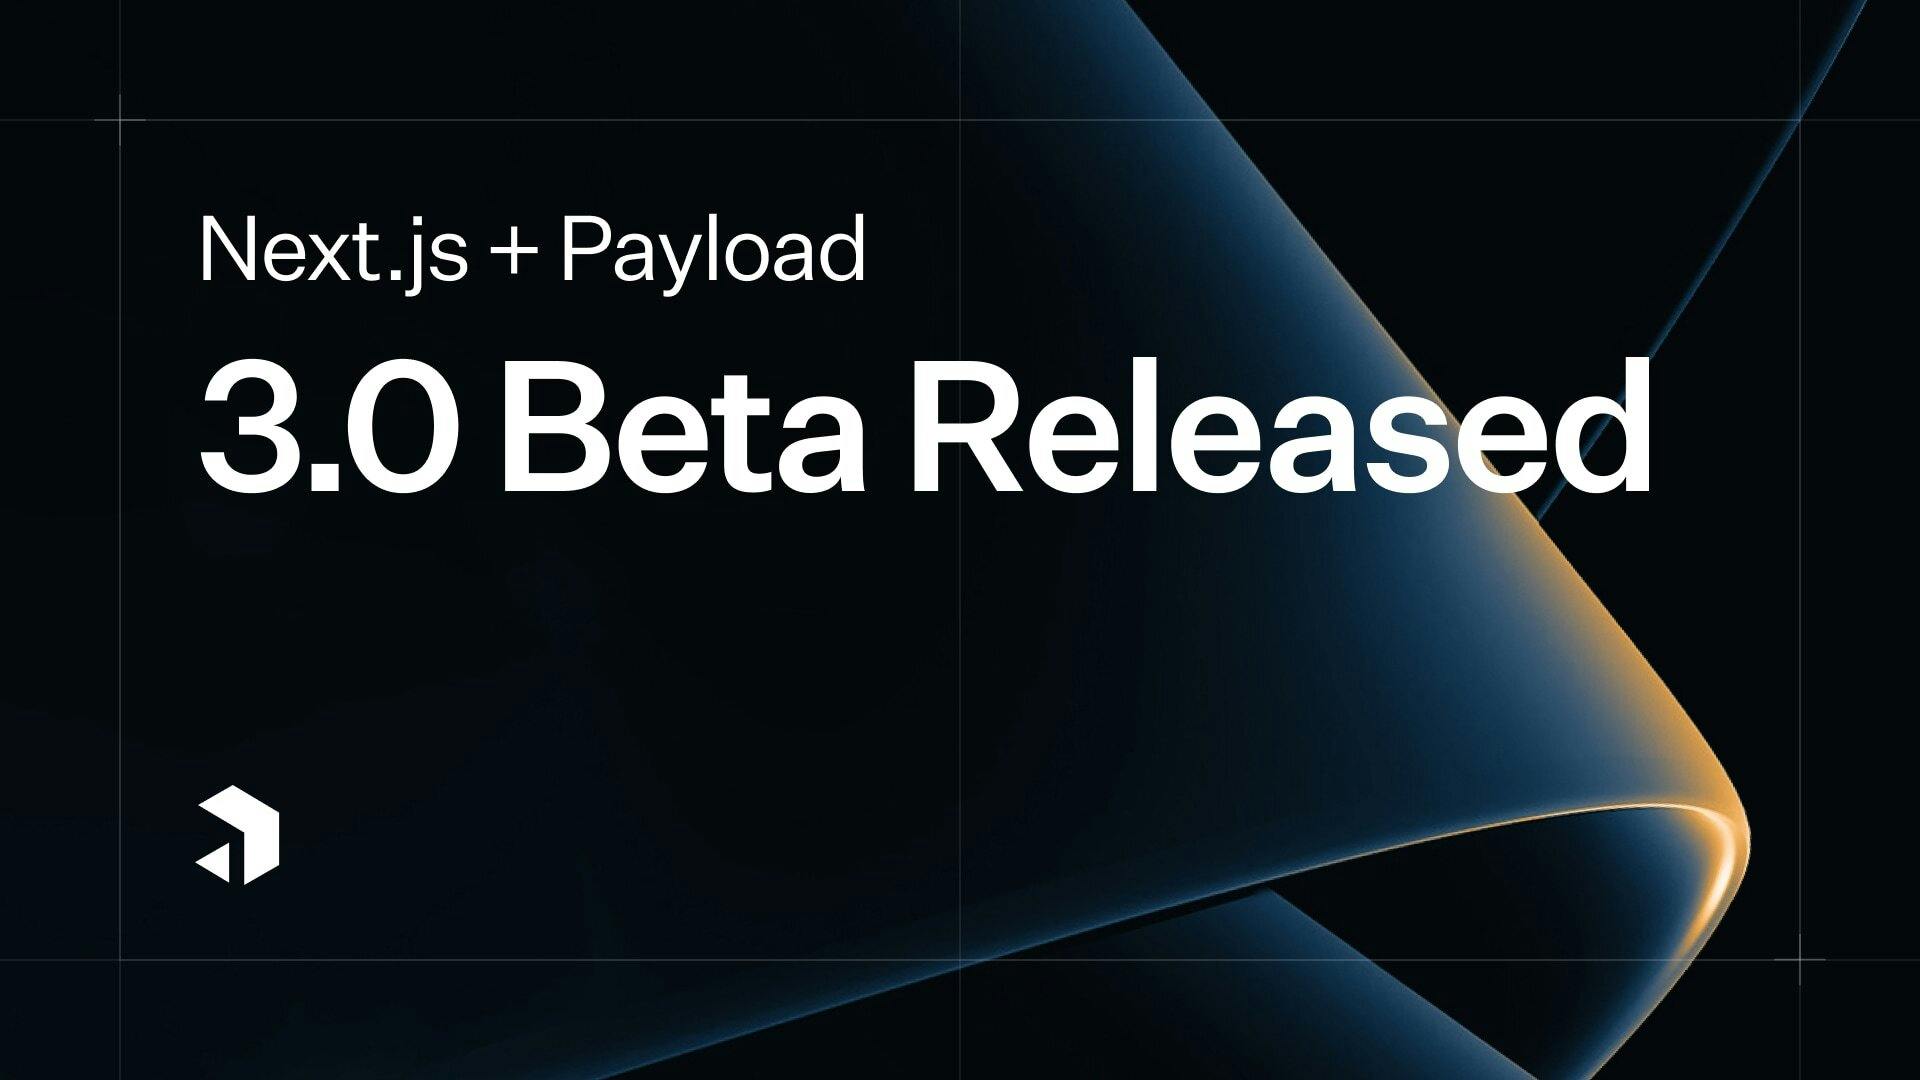 Next.js and Payload: 3.0 Beta Release